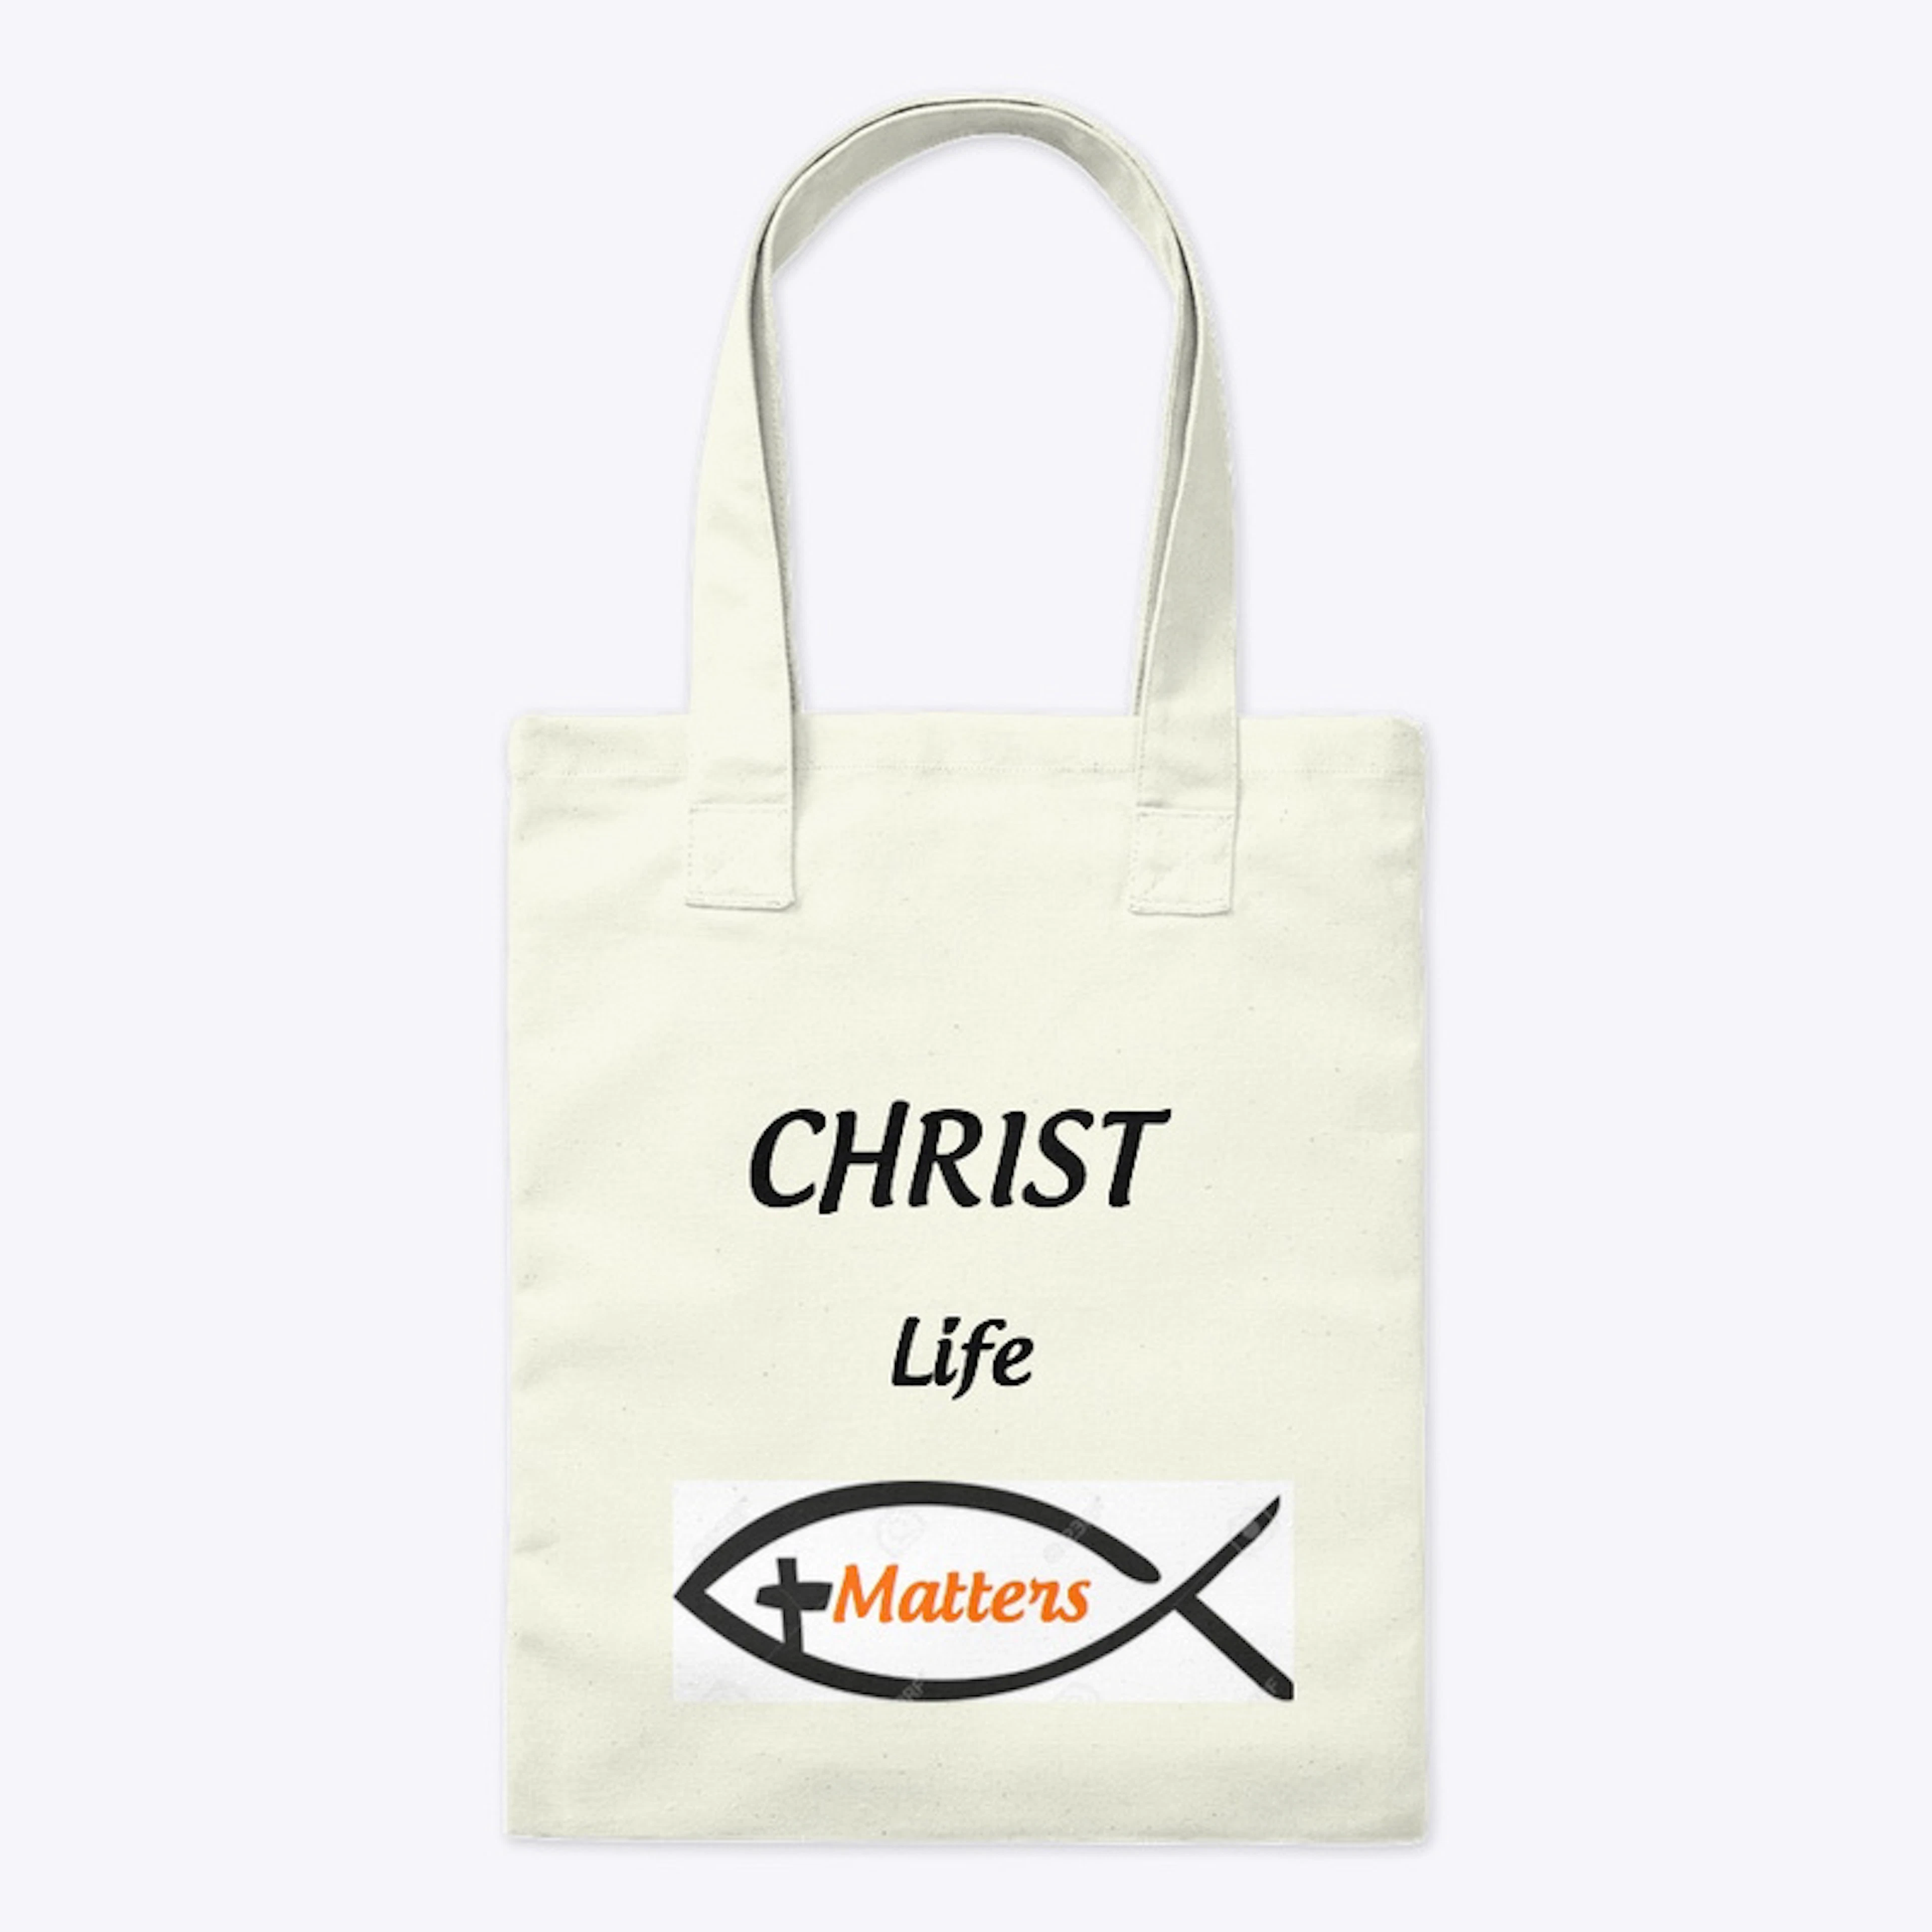 CHRISTLifeMatters PHONE CASES AND BAGS 